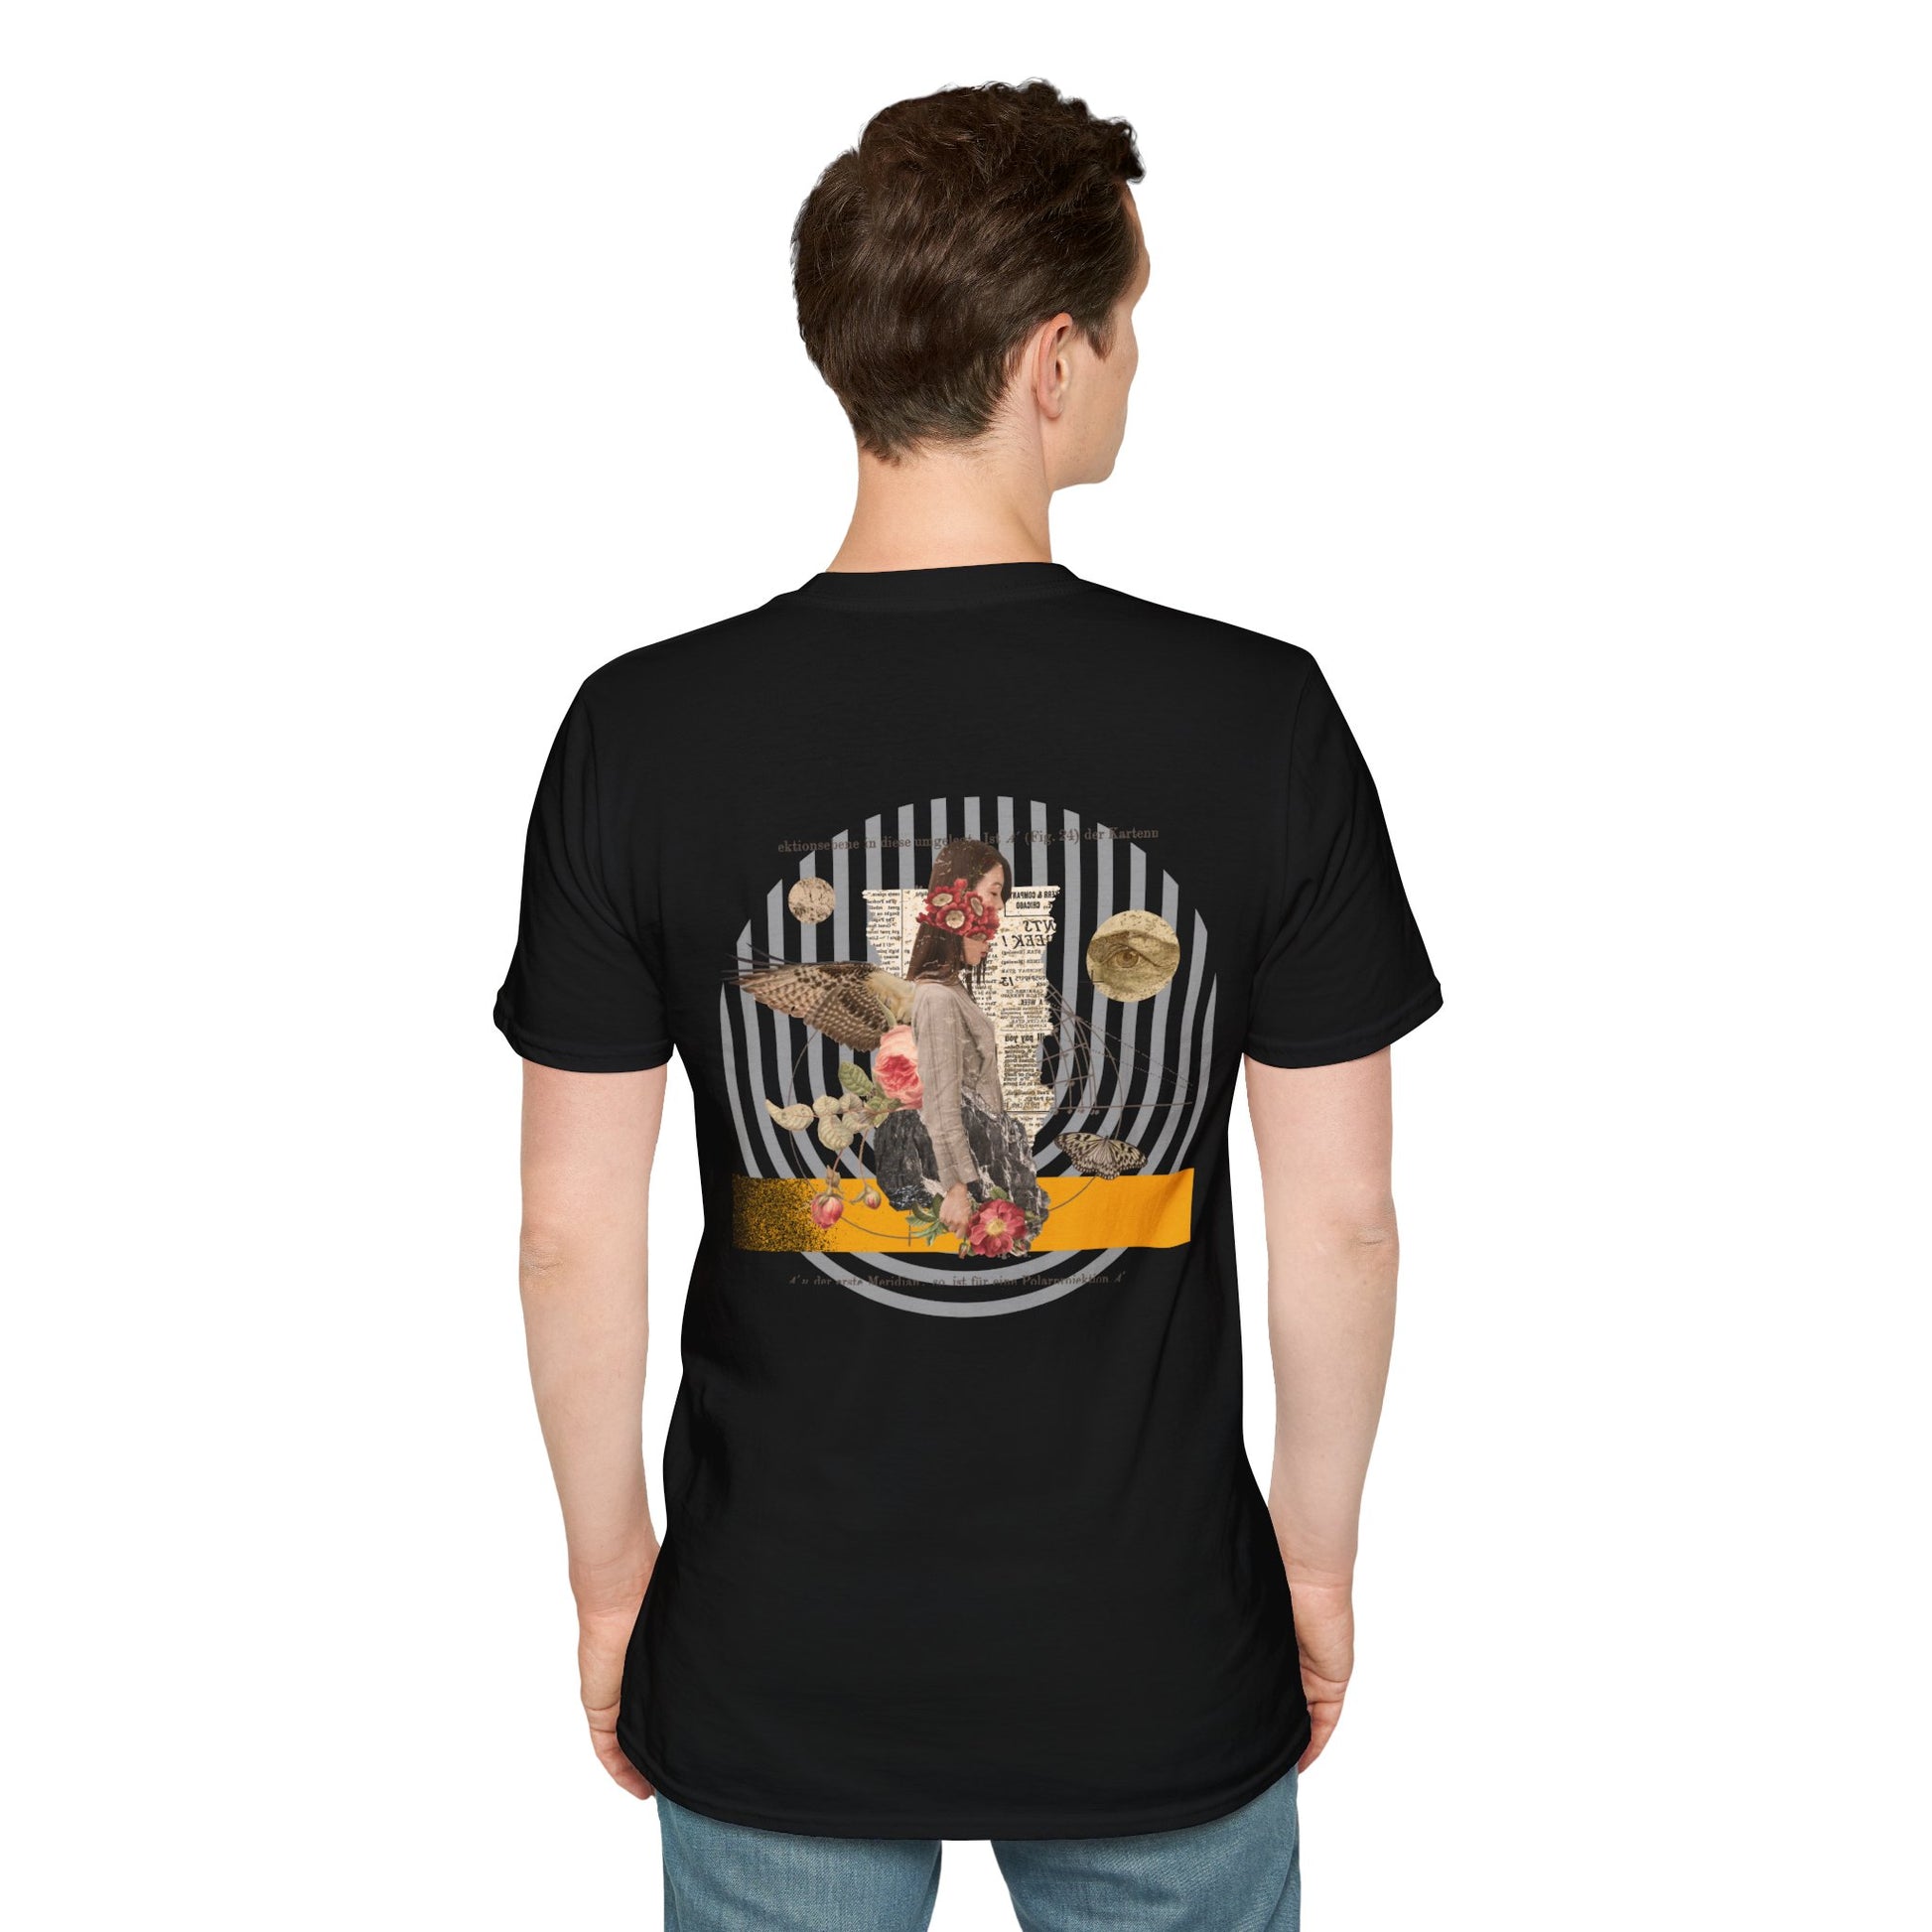 Black T-shirt with a mysterious figure surrounded by butterflies and roses, with newspaper clippings and black stripes